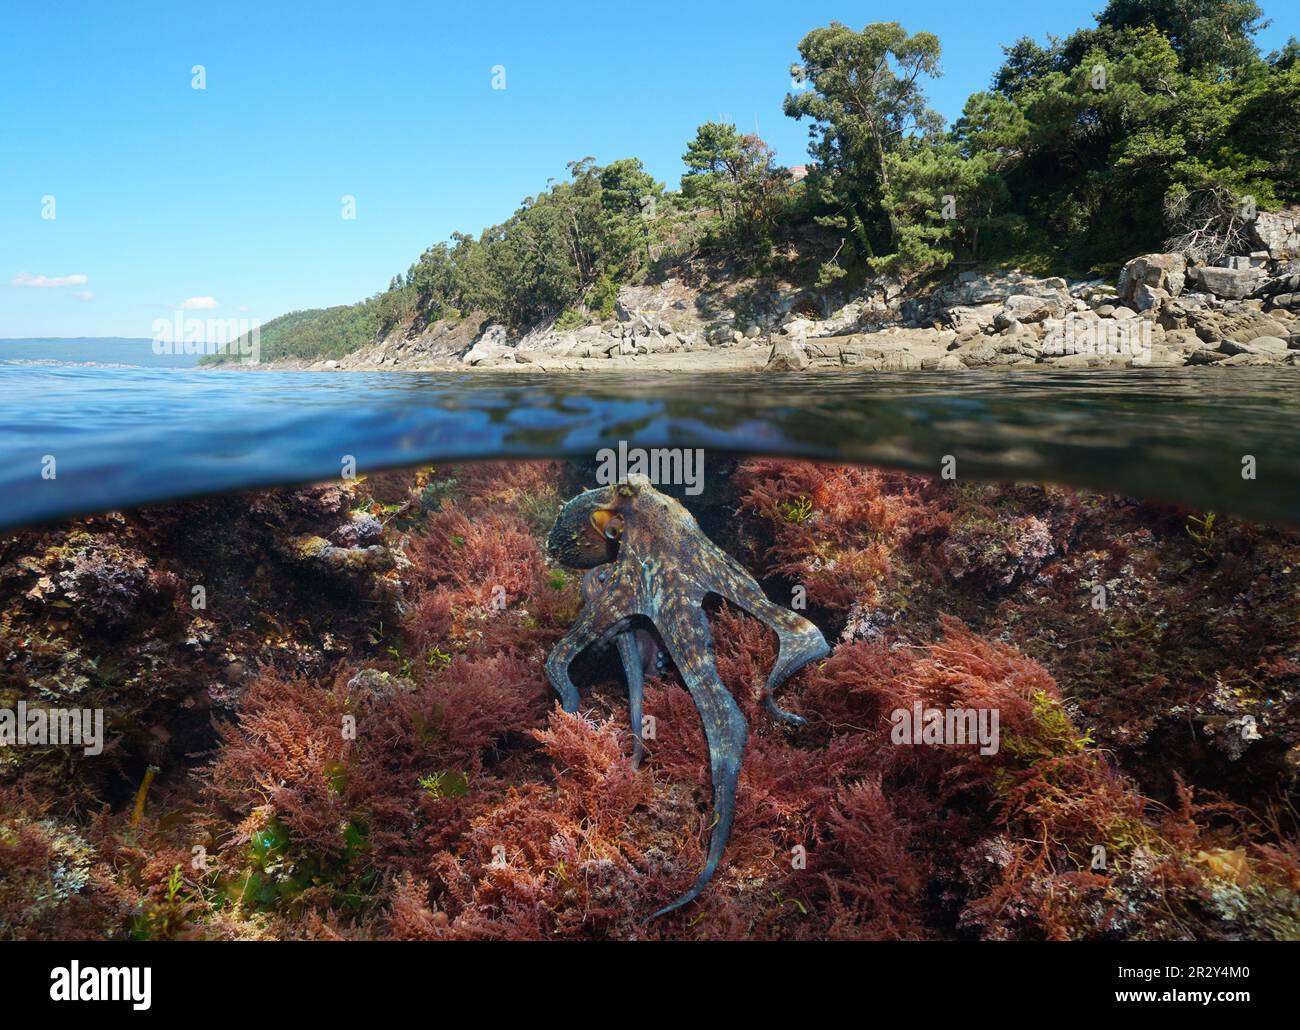 Octopus underwater in the ocean and Atlantic coastline, split level view over and under water surface, Spain, Galicia, Rias Baixas Stock Photo